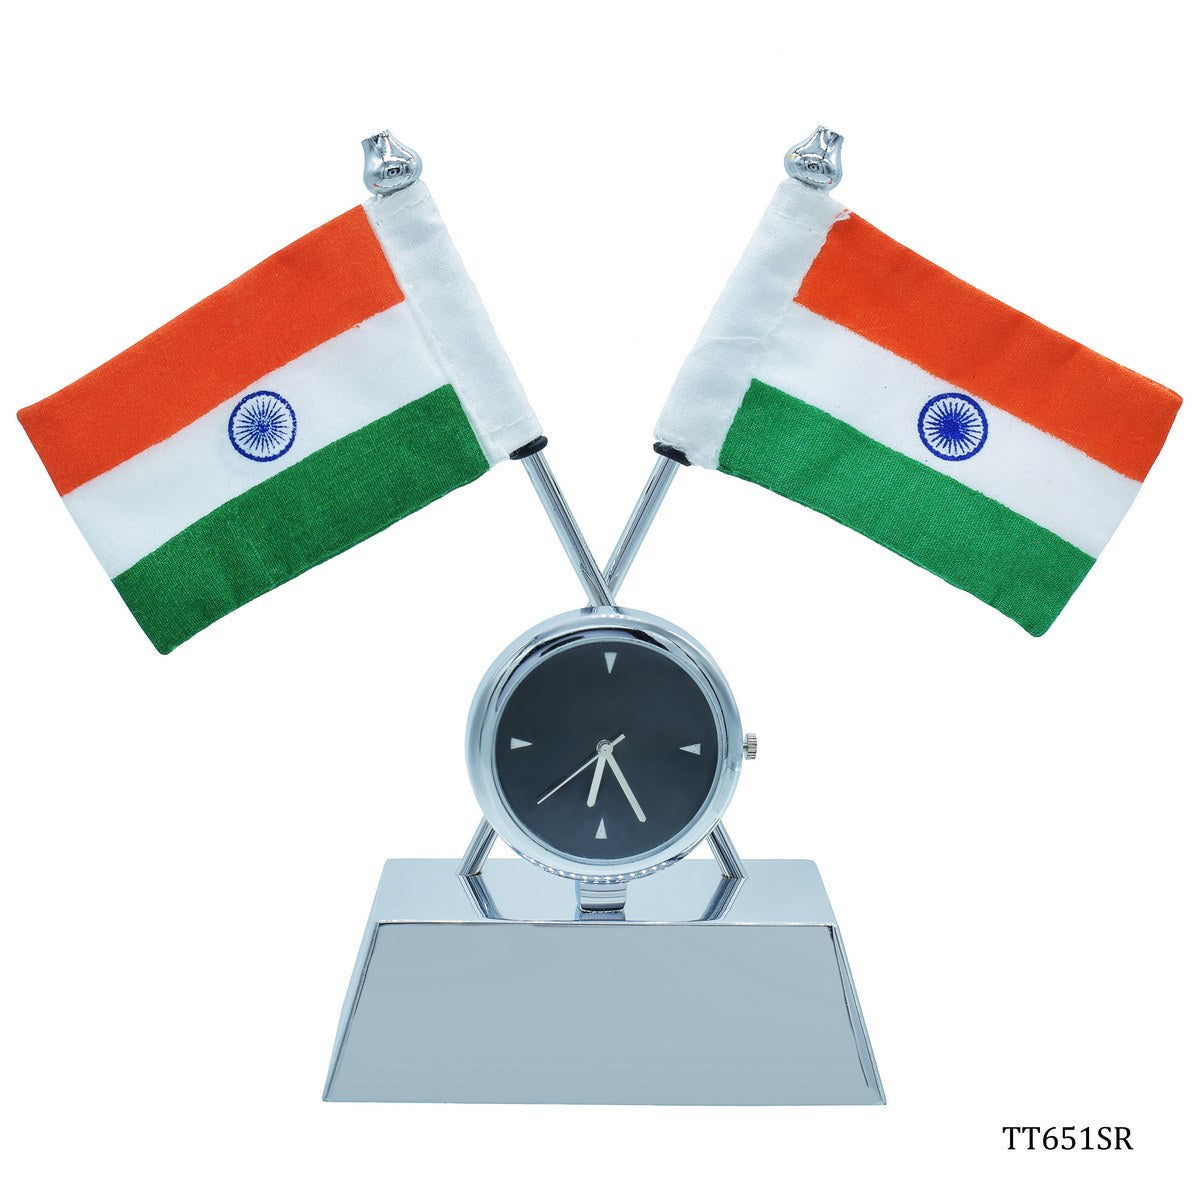 jags-mumbai Corporate Gift set Table Top Cross Flag Silver With Watch TT651SR